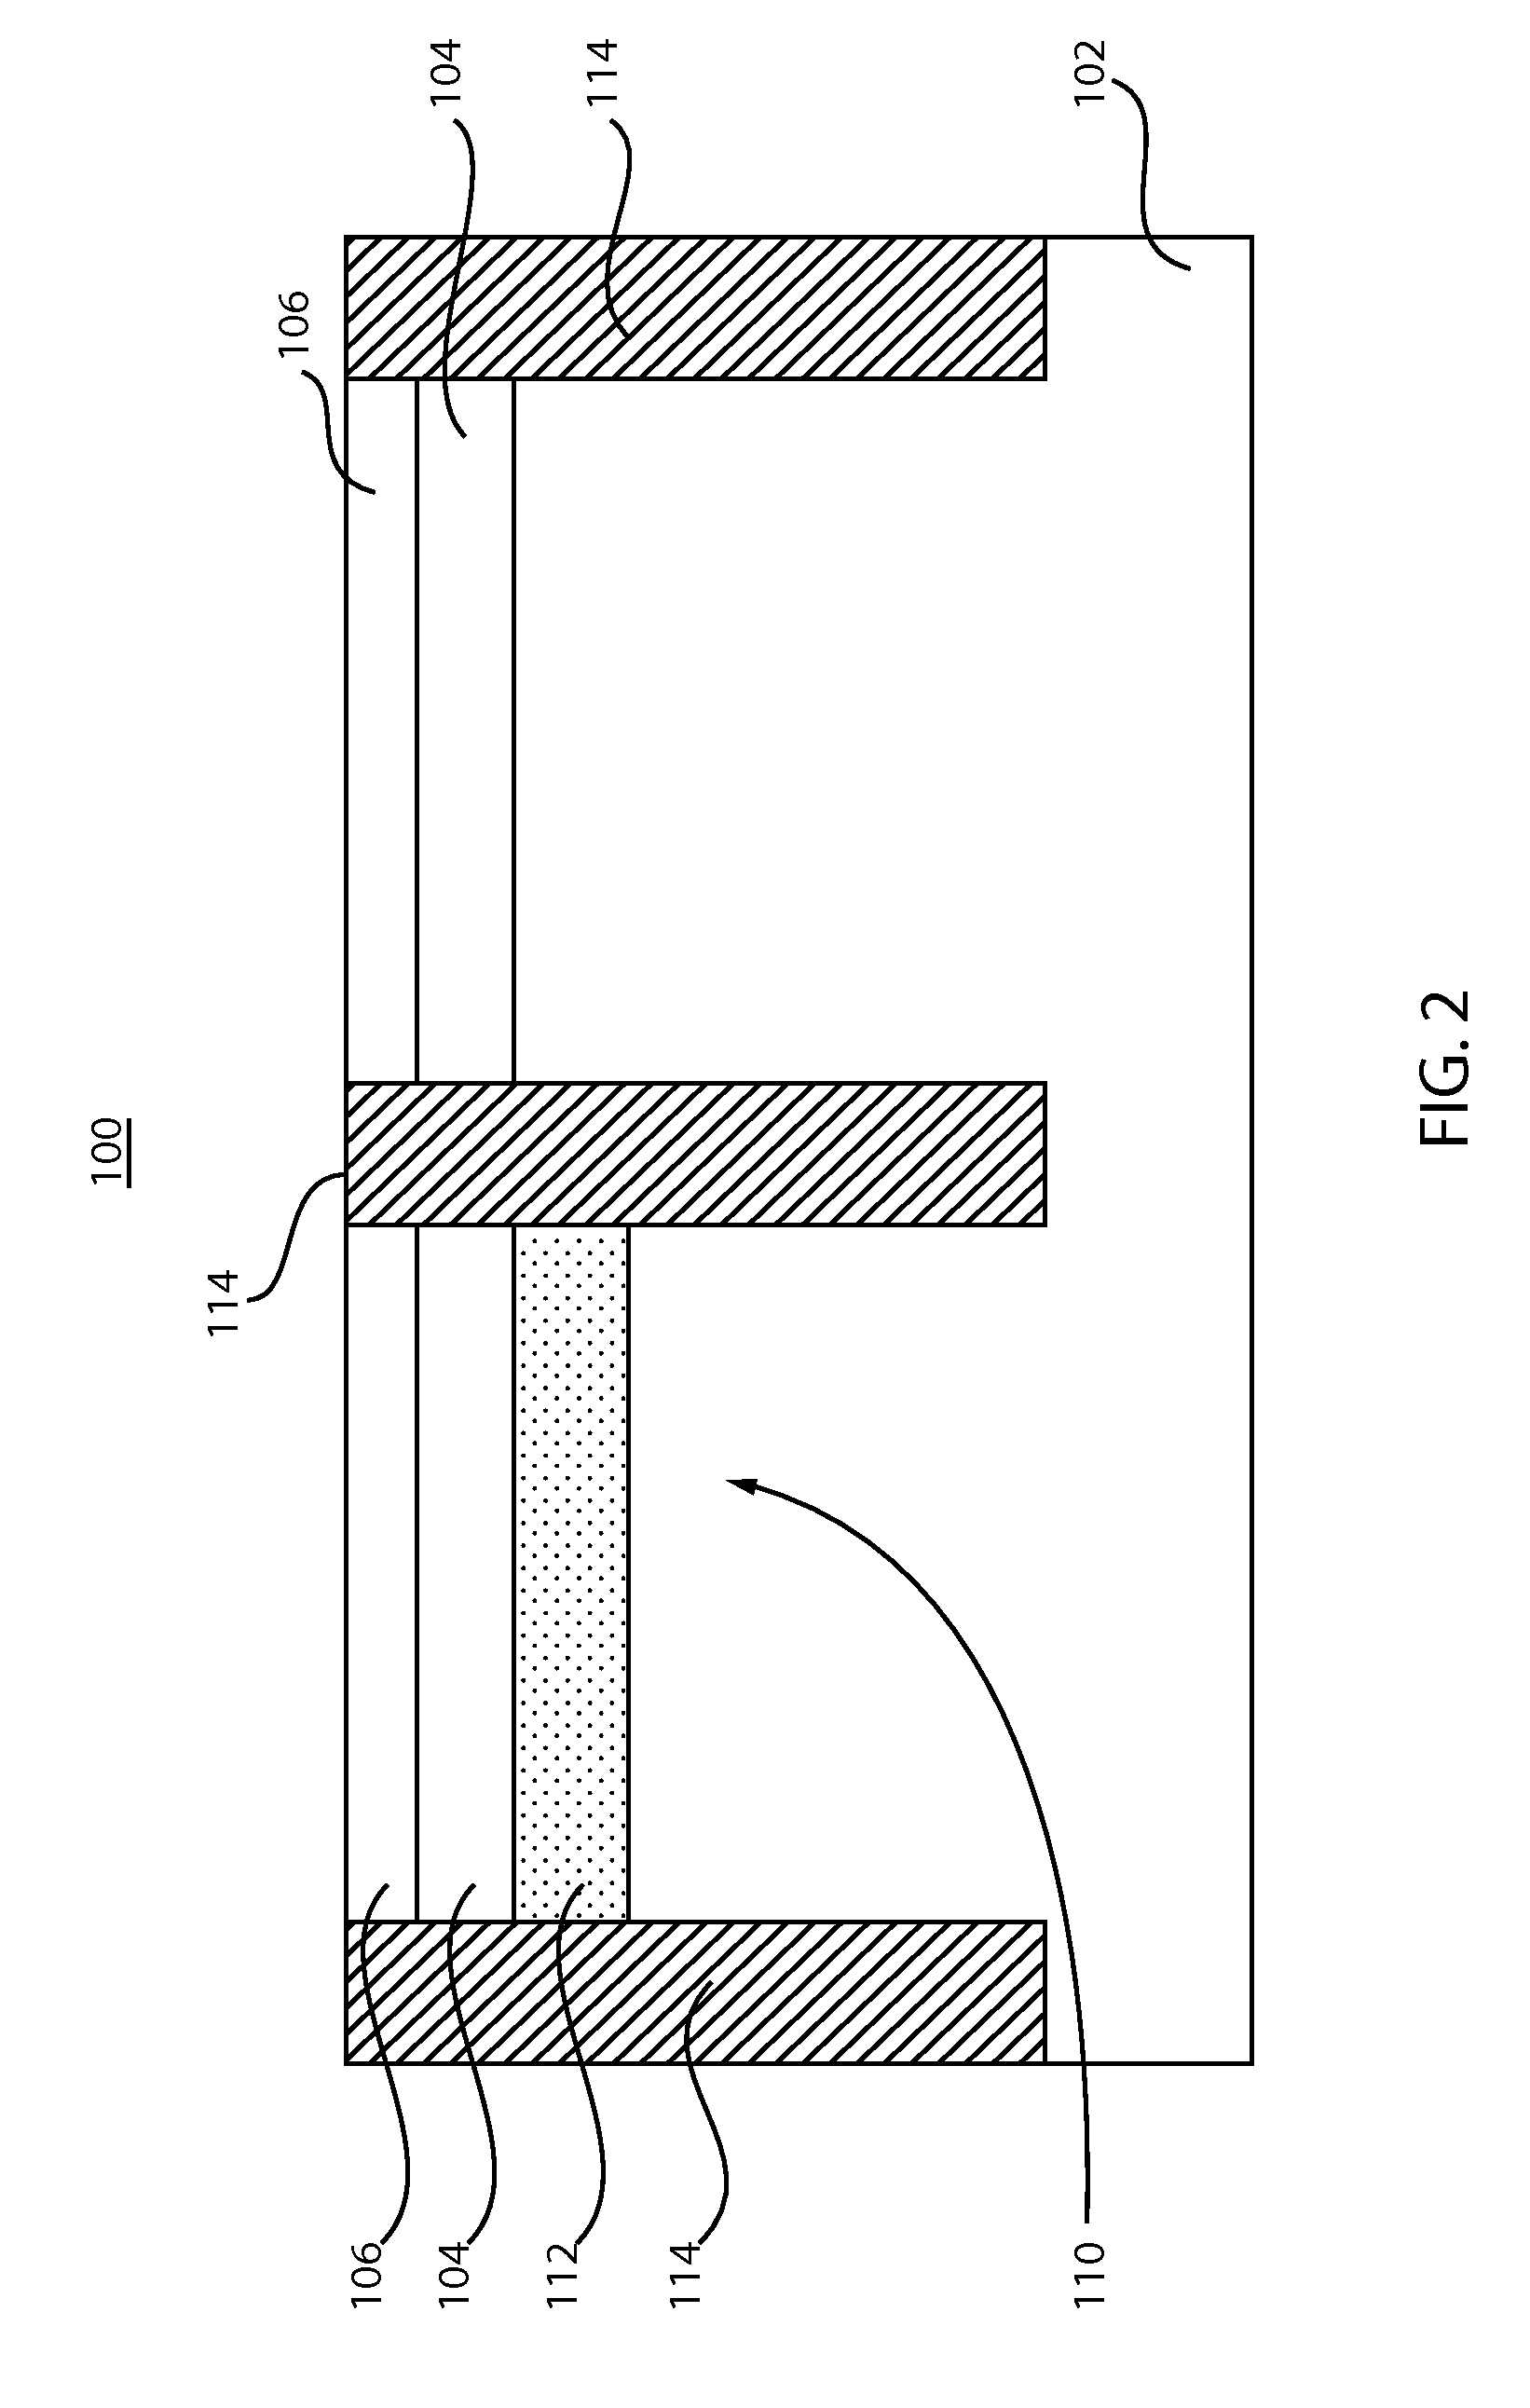 Defective p-n junction for backgated fully depleted silicon on insulator mosfet